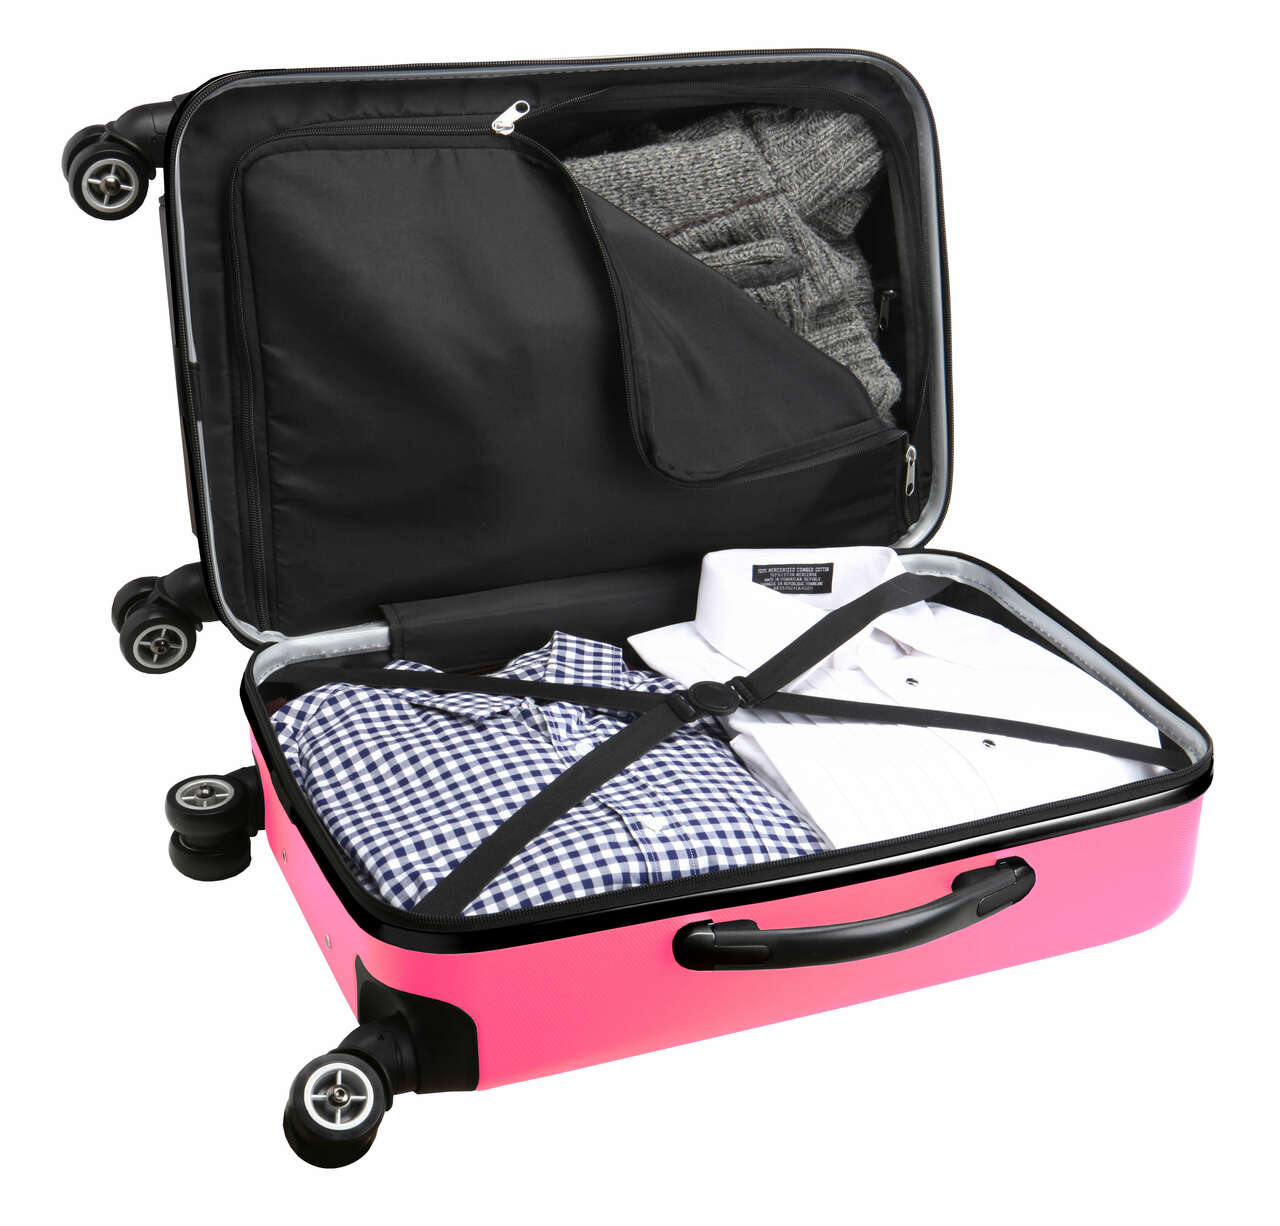 Detroit Tigers 20" Pink Domestic Carry-on Spinner